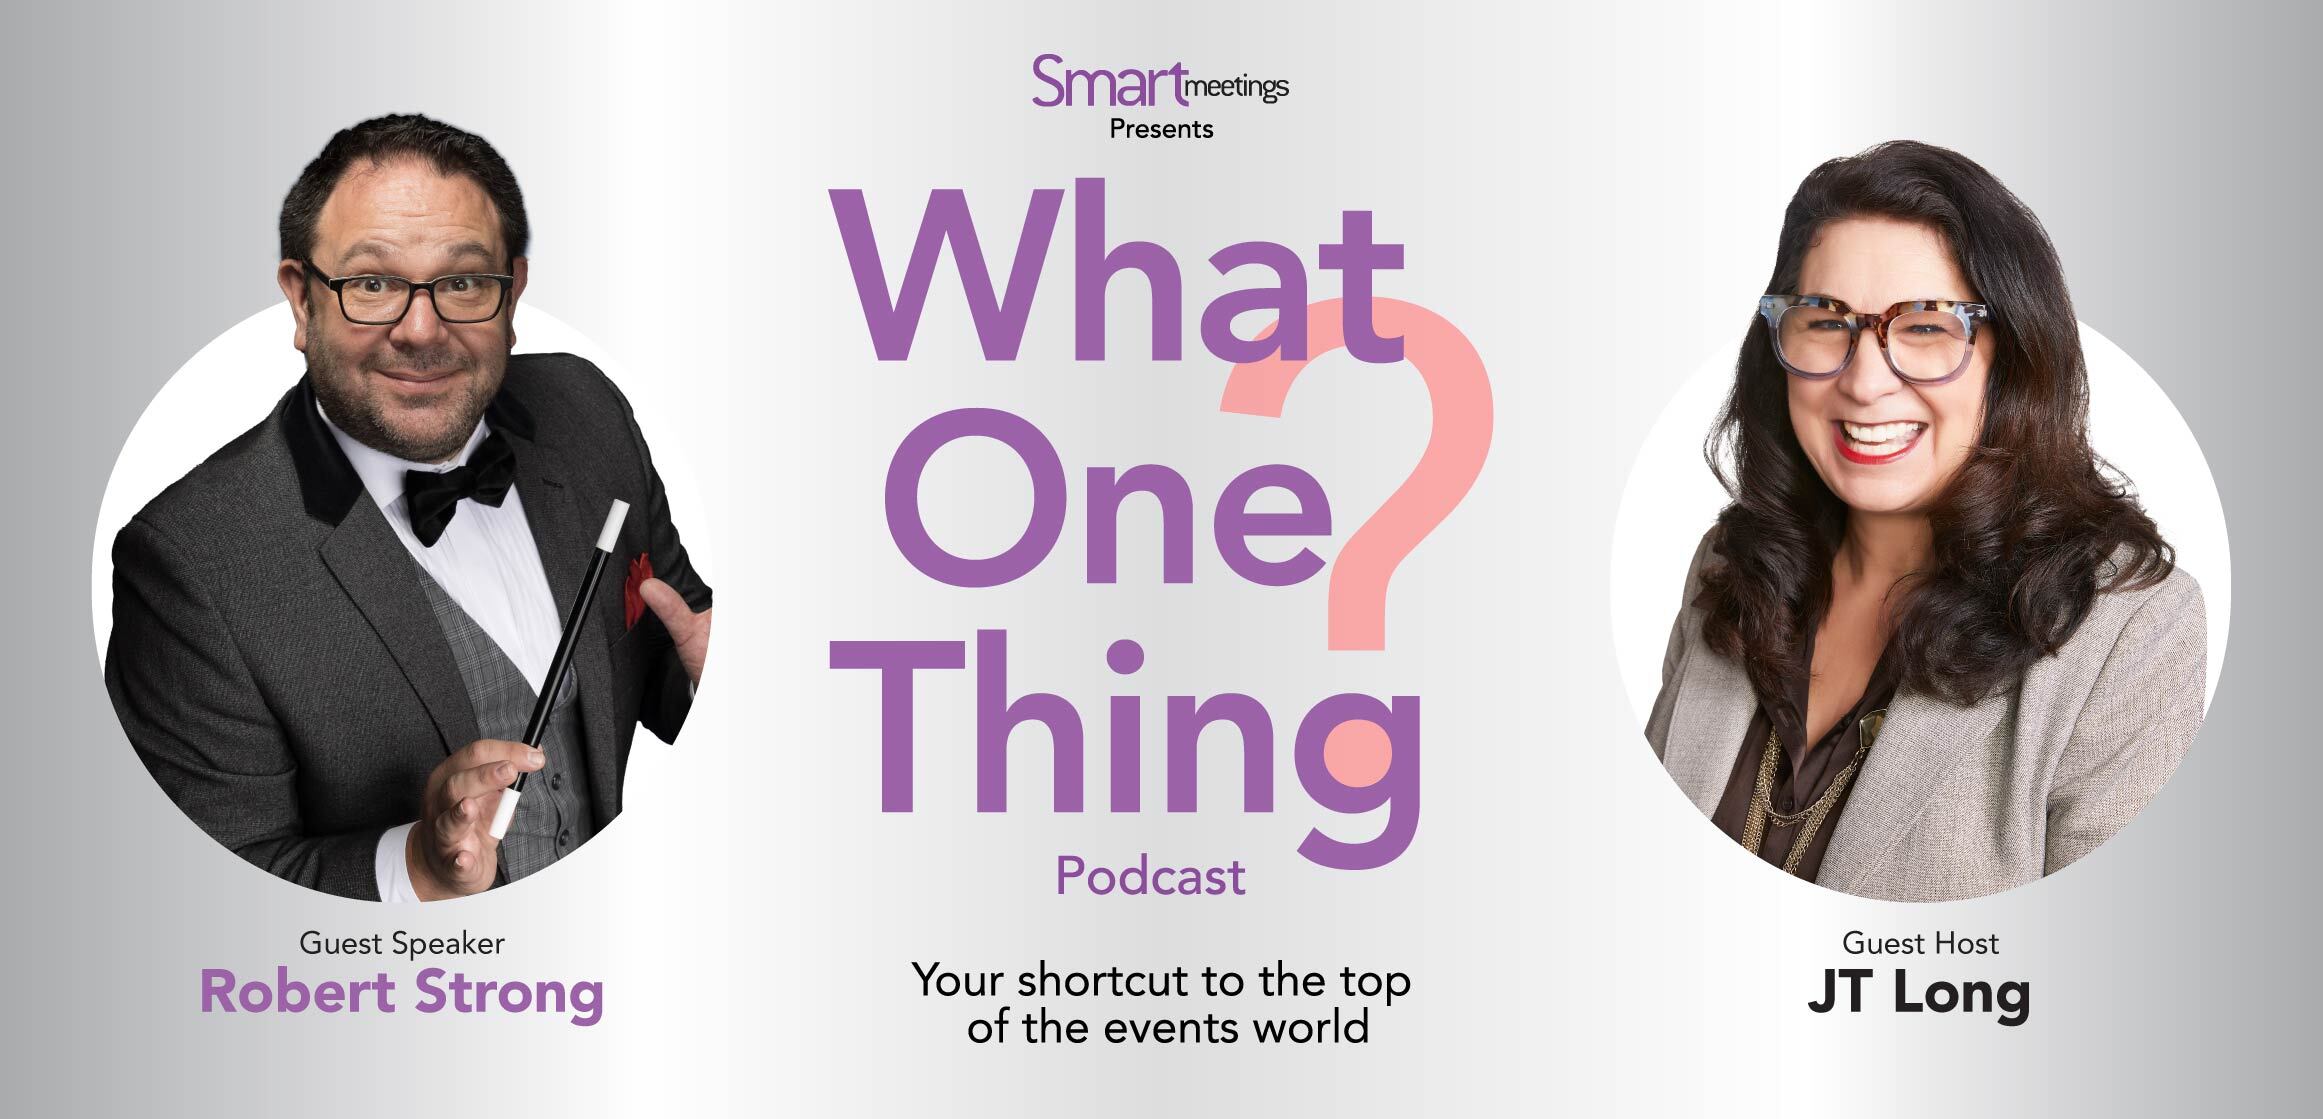 image of woman on right and man on left with "what one thing" text between them